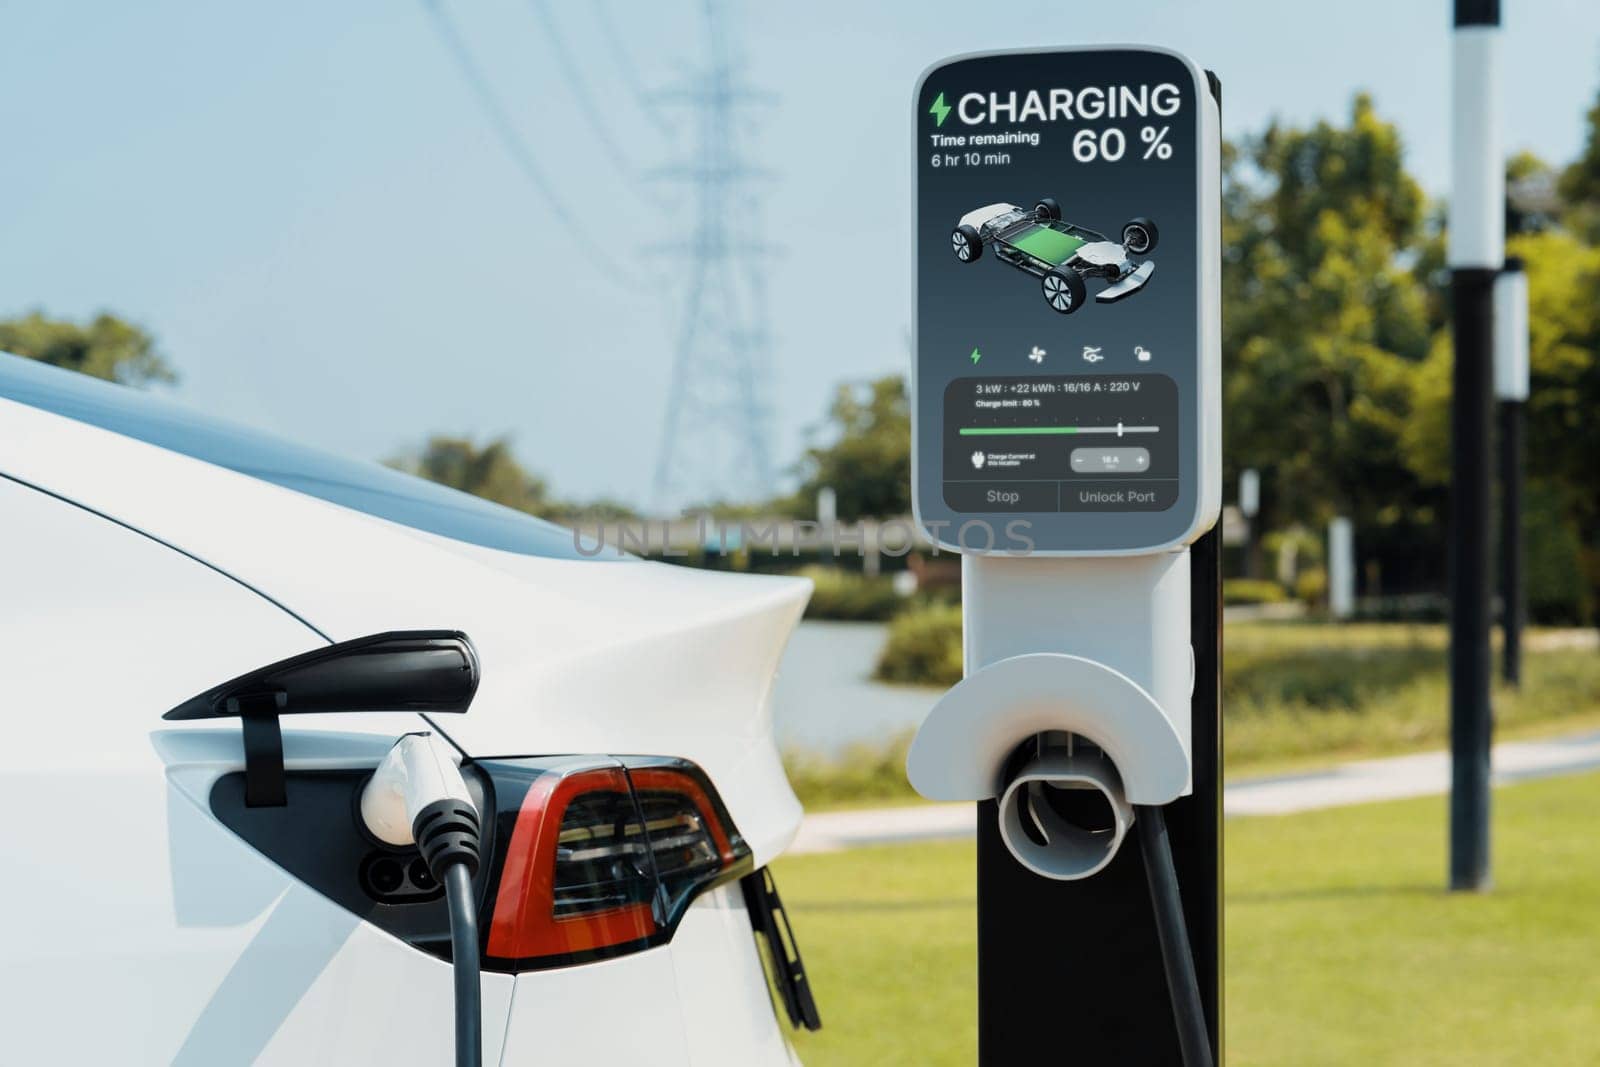 Electric vehicle or EV car recharge battery at charging station. Expedient by biancoblue